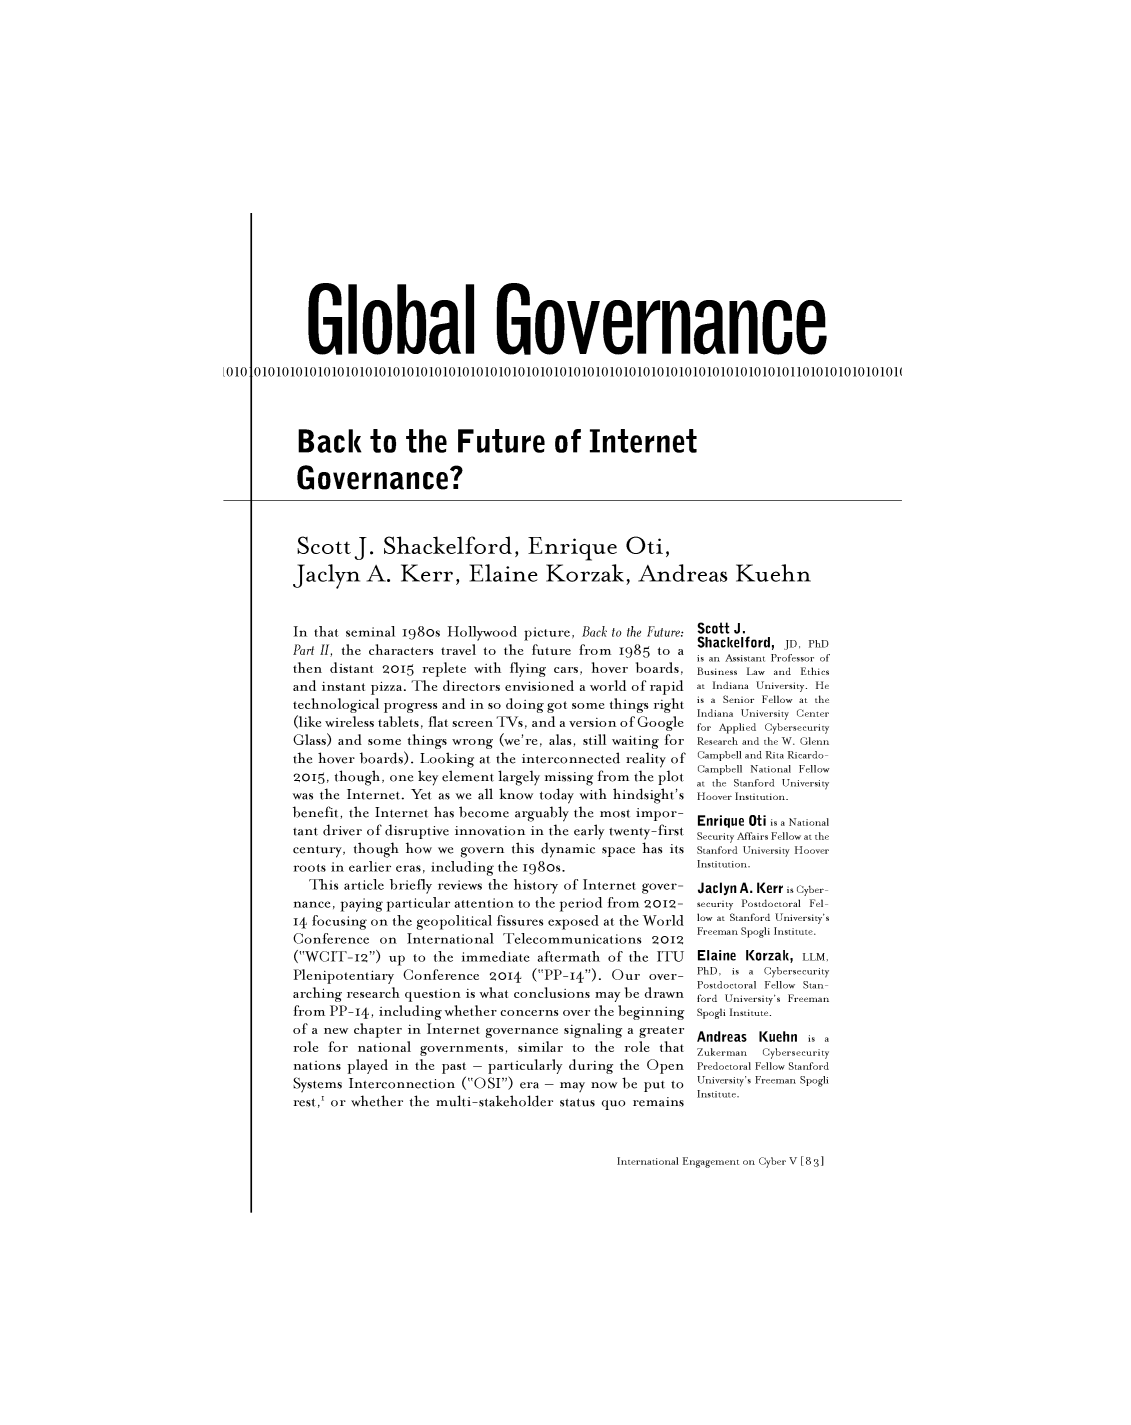 handle is hein.journals/geojaf16 and id is 610 raw text is:         Global Governance010101010101010101010101010101010101010101010101010101010101010101010101010101101010101010101(      Back to the Future of Internet      Governance?ScottJ. Shackelford, Enrique Oti,Jaclyn A. Kerr, Elaine Korzak, Andreas KuehnIn that seminal 1980s Hollywood  picture, Back to the Future:Part II, the characters travel to the future from 1985 to athen distant 2oi5  replete with flying cars, hover boards,and instant pizza. The directors envisioned a world of rapidtechnological progress and in so doing got some things right(like wireless tablets, flat screen TVs, and a version of GoogleGlass) and some  things wrong (we're, alas, still waiting forthe hover boards). Looking at the interconnected reality of2015, though, one key element largely missing from the plotwas the Internet. Yet as we all know today with hindsight'sbenefit, the Internet has become arguably the most impor-tant driver of disruptive innovation in the early twenty-firstcentury, though how  we govern  this dynamic space has itsroots in earlier eras, including the 1980s.  This  article briefly reviews the history of Internet gover-nance, paying particular attention to the period from 2012-14 focusing on the geopolitical fissures exposed at the WorldConference   on  International Telecommunications   2012(WCIT-12)   up to the immediate  aftermath  of the ITUPlenipotentiary Conference   2014  (PP-14). Our   over-arching research question is what conclusions may be drawnfrom PP-14,  including whether concerns over the beginningof a new chapter in Internet governance signaling a greaterrole for national  governments,  similar to the role thatnations played in the past - particularly during the OpenSystems Interconnection  (OSI) era - may now  be put torest,I or whether the multi-stakeholder status quo remainsScott J.Shackelford, JD, PhDis an Assistant Professor ofBusiness Law and Ethicsat Indiana University. Heis a Senior Fellow at theIndiana University Centerfor Applied CybersecurityResearch and the W. GlennCampbell and Rita Ricardo-Campbell National Fellowat the Stanford UniversityHoover Institution.Enrique Oti is a NationalSecurity Affairs Fellow at theStanford University HooverInstitution.Jaclyn A. Kerr is Cyber-security Postdoctoral Fel-low at Stanford University'sFreeman Spogli Institute.Elaine Korzak, LLM,PhD, is a CybersecurityPostdoctoral Fellow Stan-ford University's FreemanSpogli Institute.Andreas   (uehn is aZukerman     CybersecurityPredoctoral Fellow StanfordUniversity's Freeman SpogliInstitute.International Engagement on Cyber V [8 31010